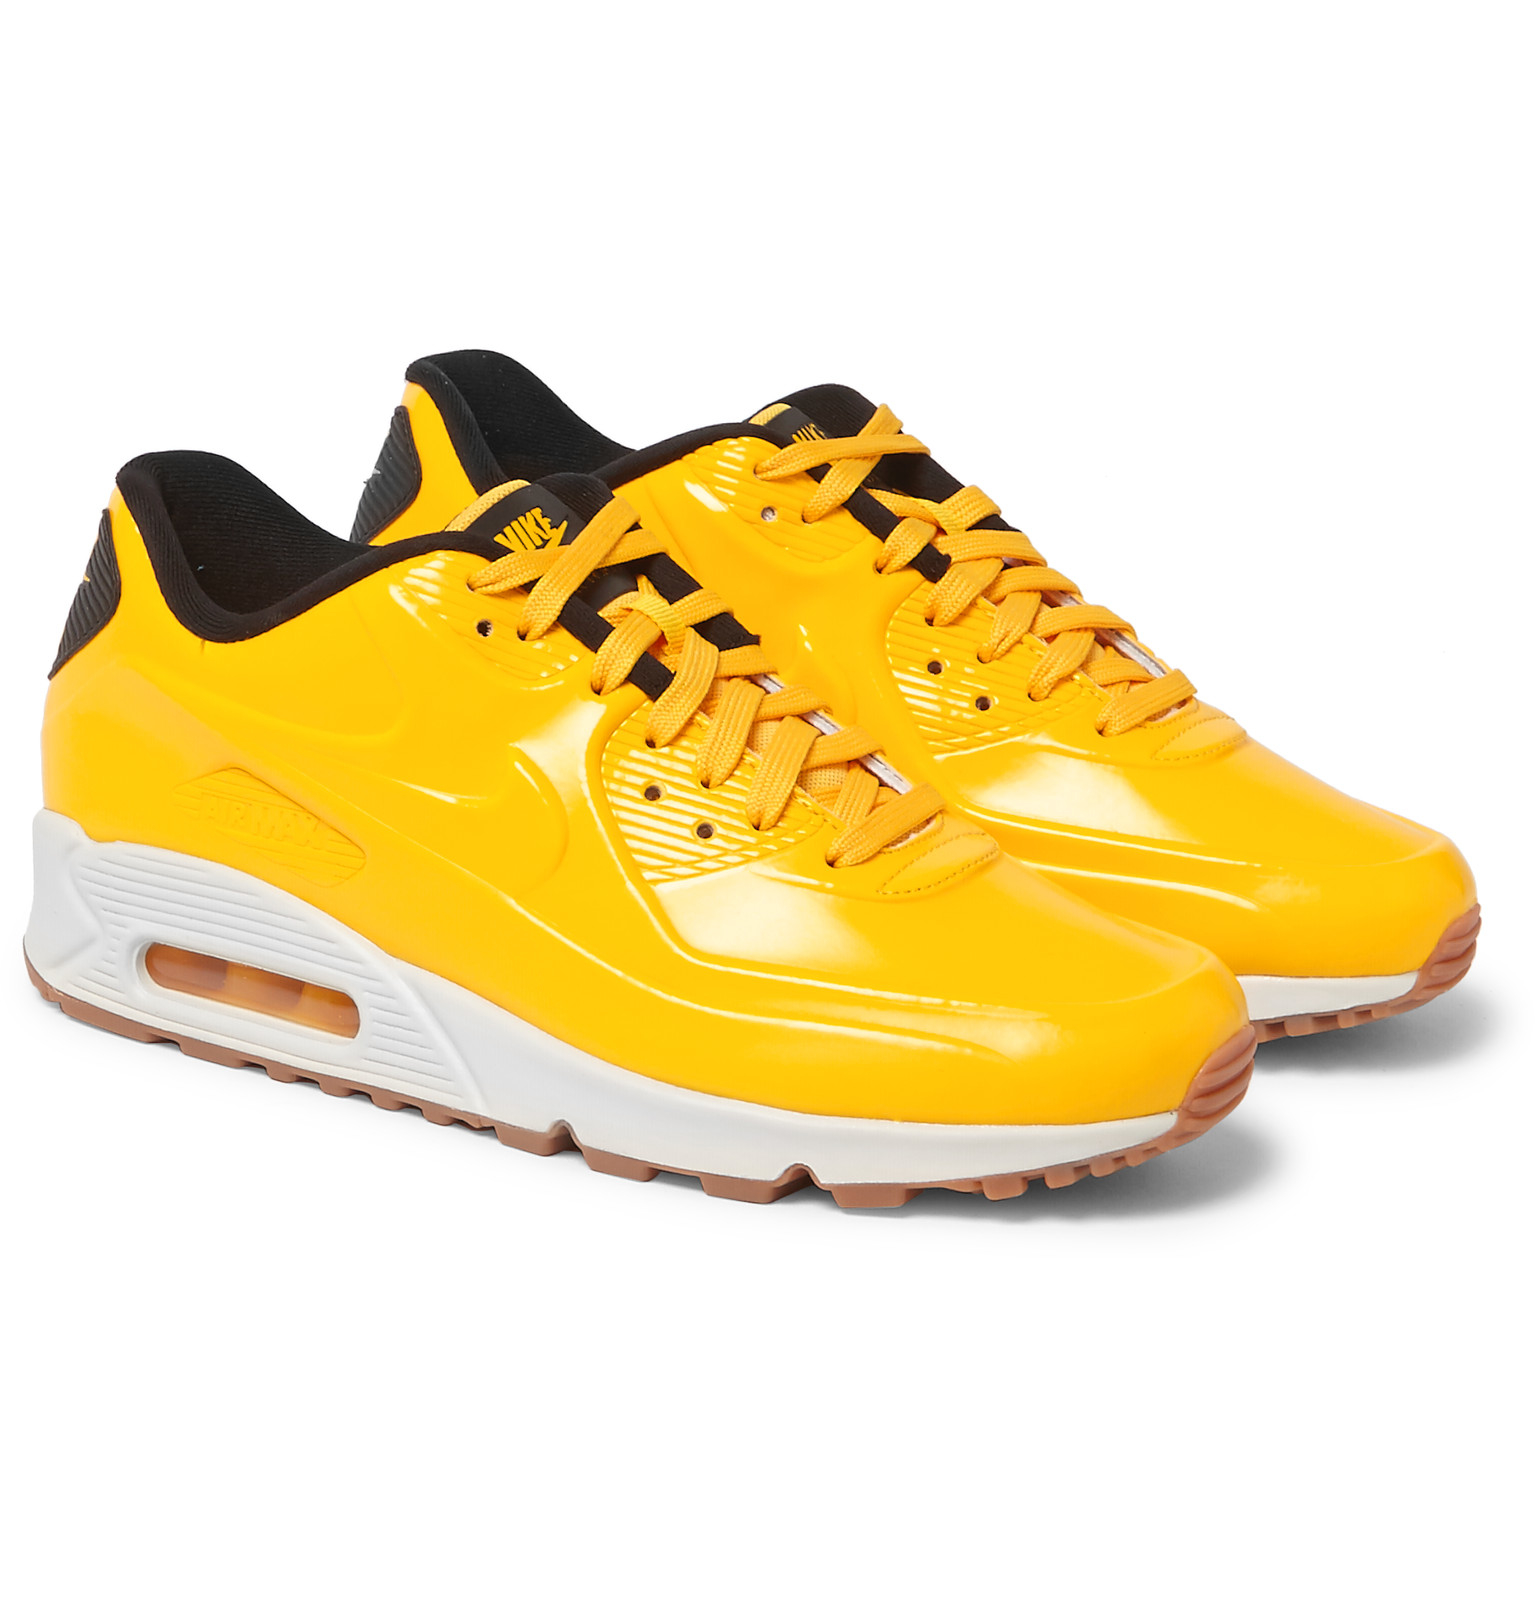 Nike Air Max 90 Vt Patent-leather Sneakers in Yellow for Men - Lyst